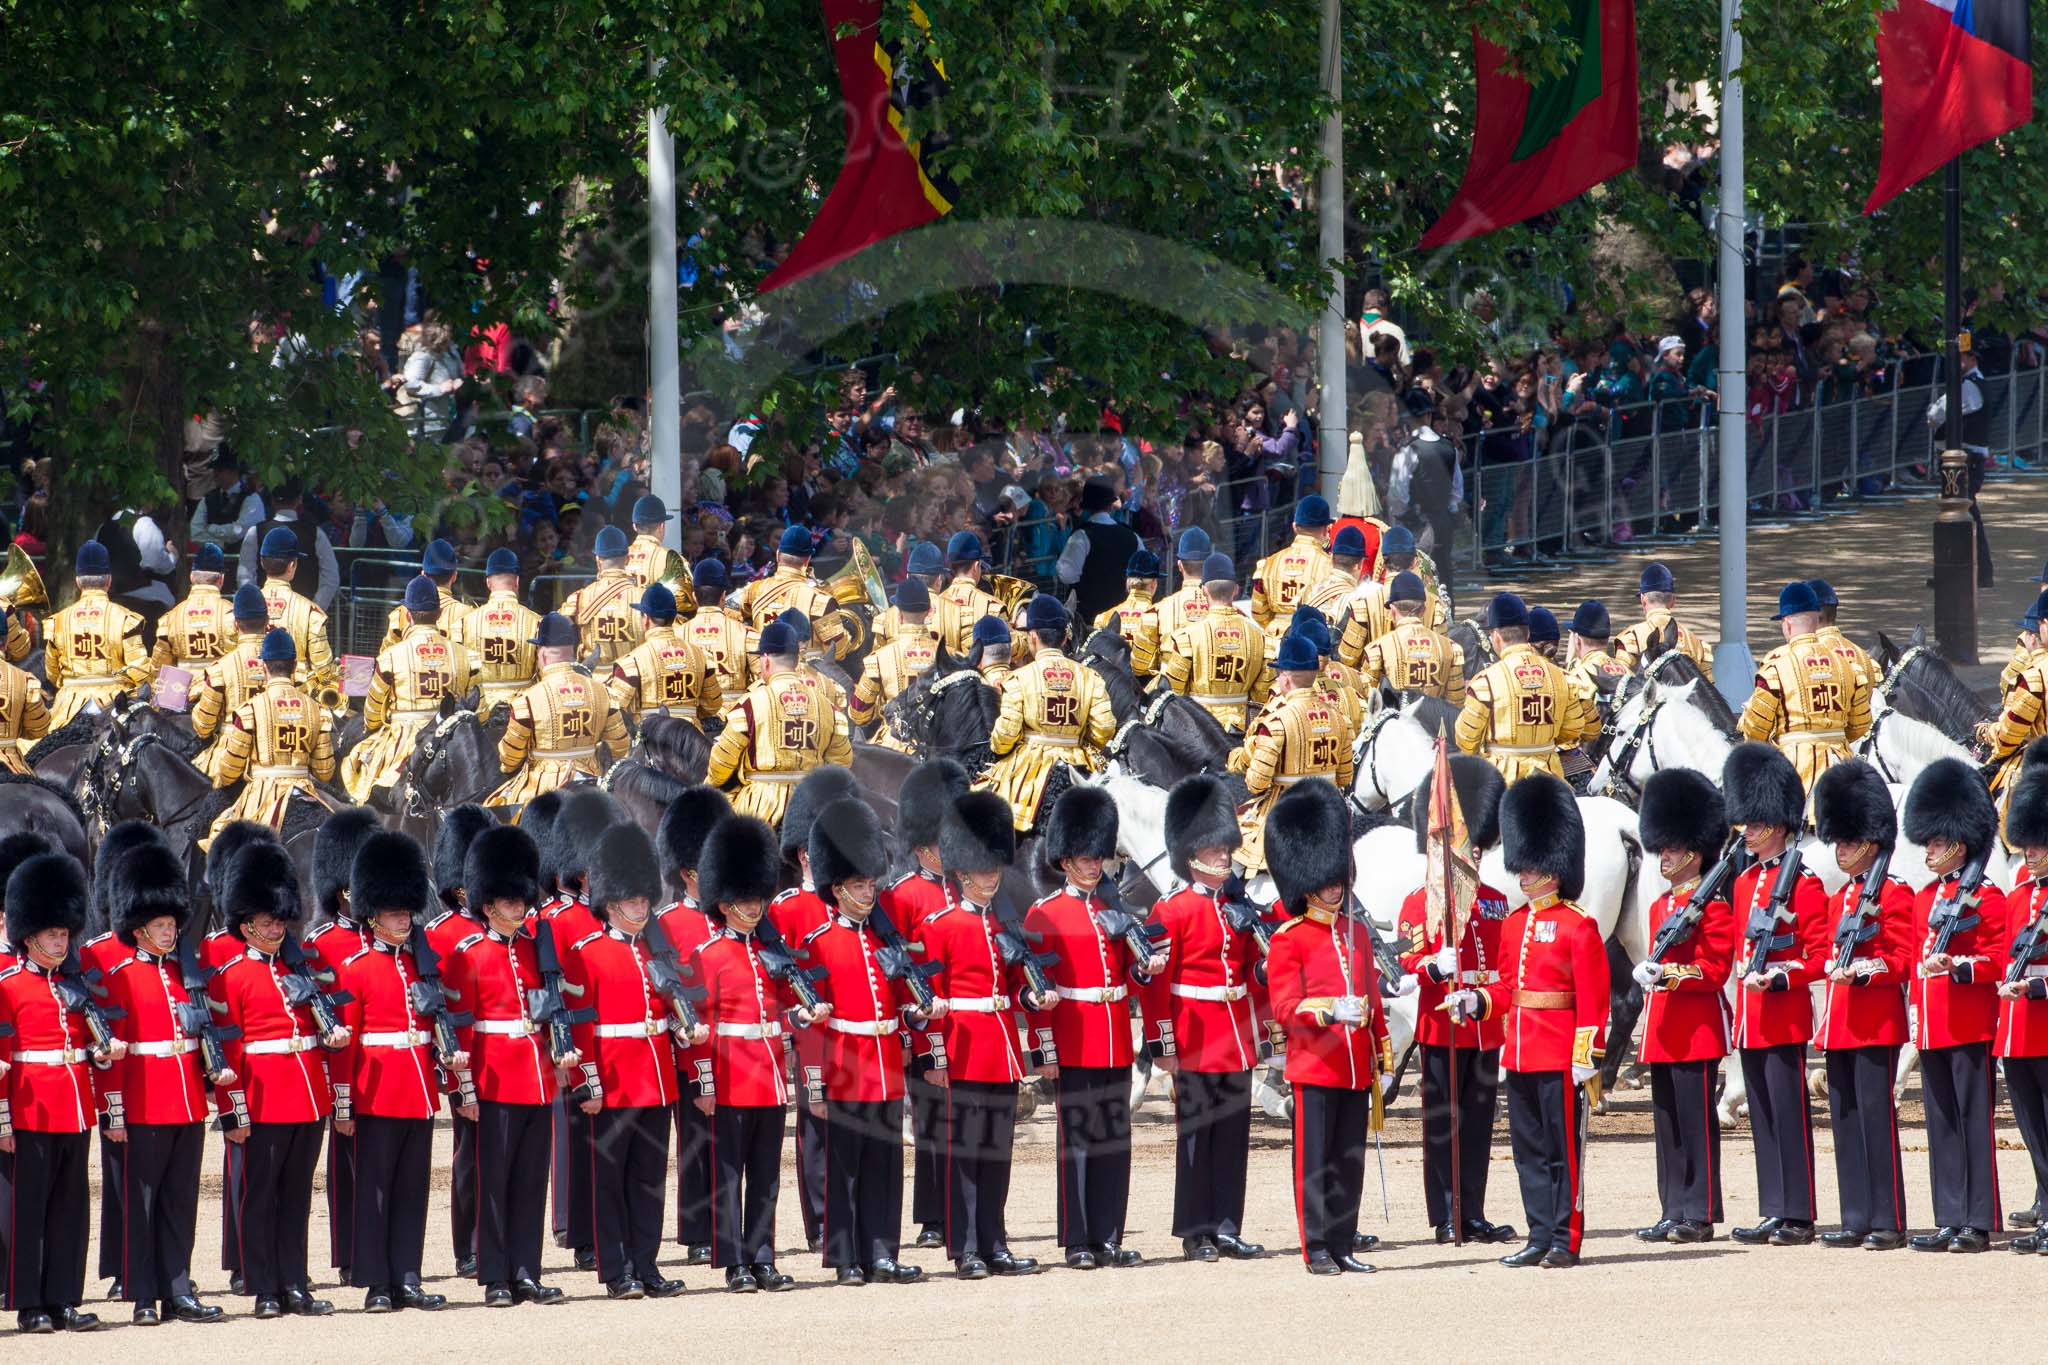 The Colonel's Review 2013: The Mounted Bands of the Household Cavalry are ready to leave, they follow the Royal Horse Artillery to march off via The Mall..
Horse Guards Parade, Westminster,
London SW1,

United Kingdom,
on 08 June 2013 at 12:02, image #807